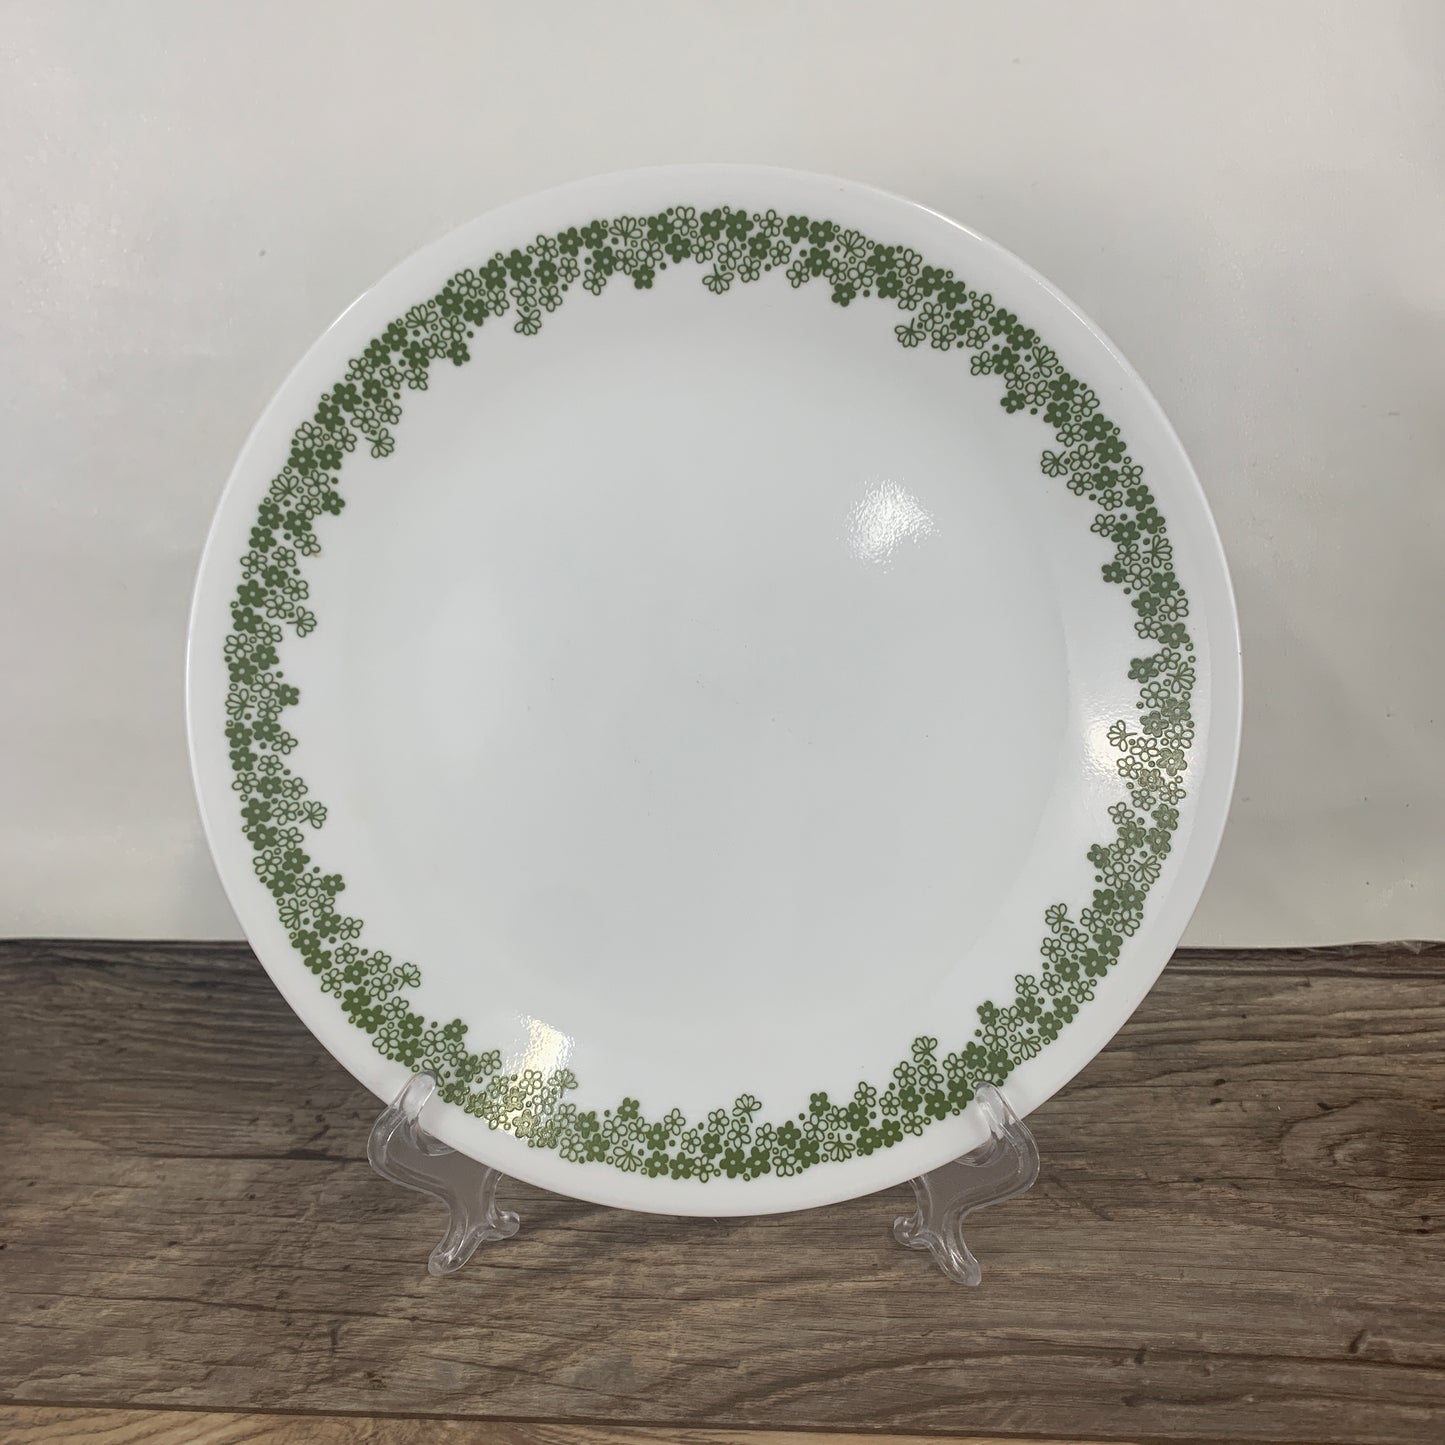 Corelle Salad Plate Spring Blossom Pattern Crazy Daisy Plate Salad Green and White Flowers